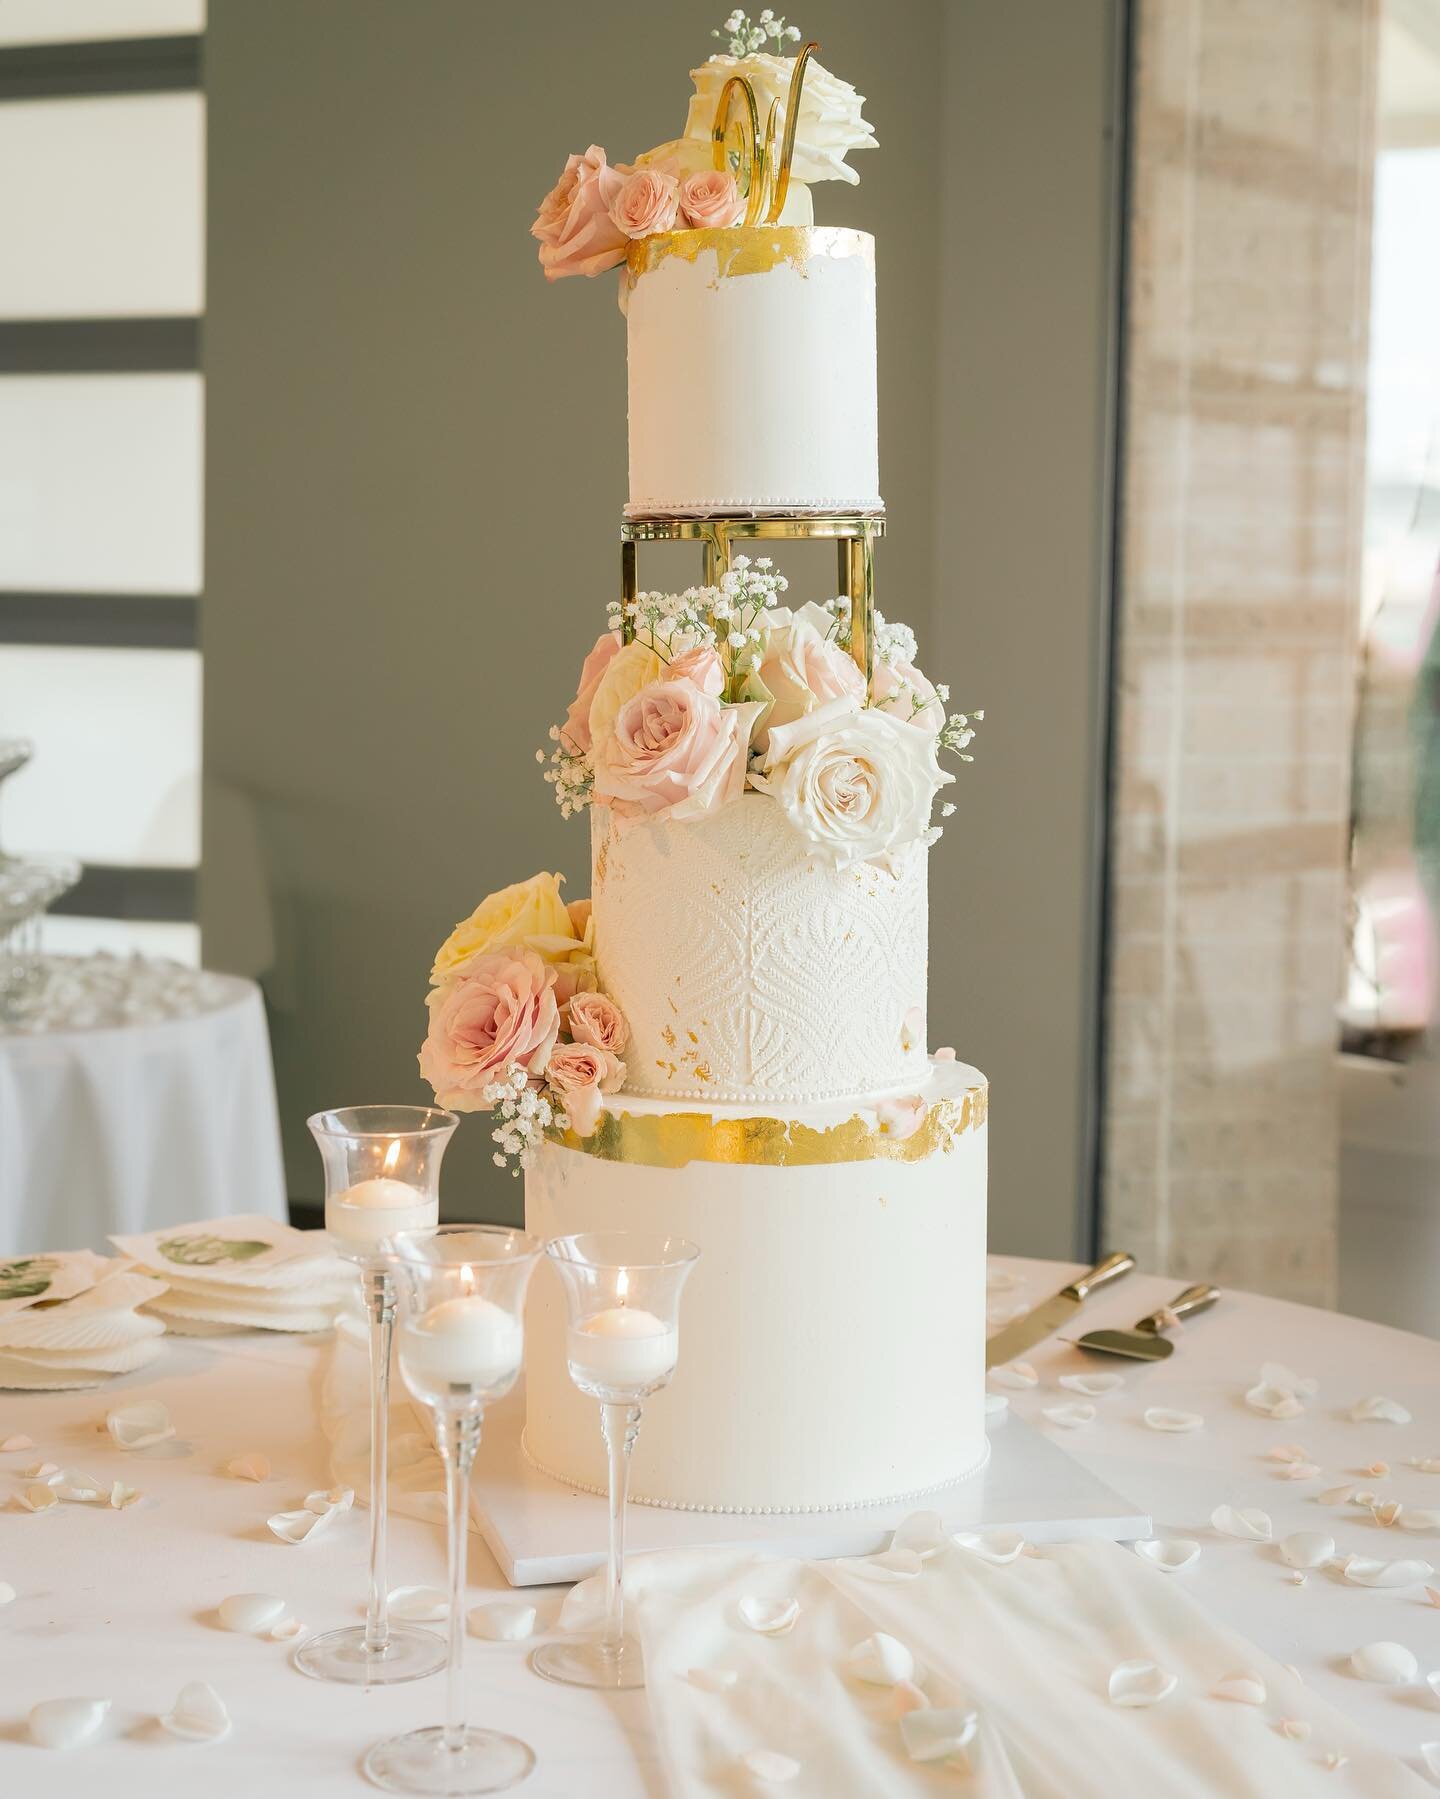 L &amp; C 🤍
.
Beautiful three-tiered modern cake, adorned with delicate florals and soft details. 
.
We still have availability for 2023 weddings! Head over to our website and fill out our wedding questionnaire🤍
.
.
.
.
.

#aluxecakestudio #celebra